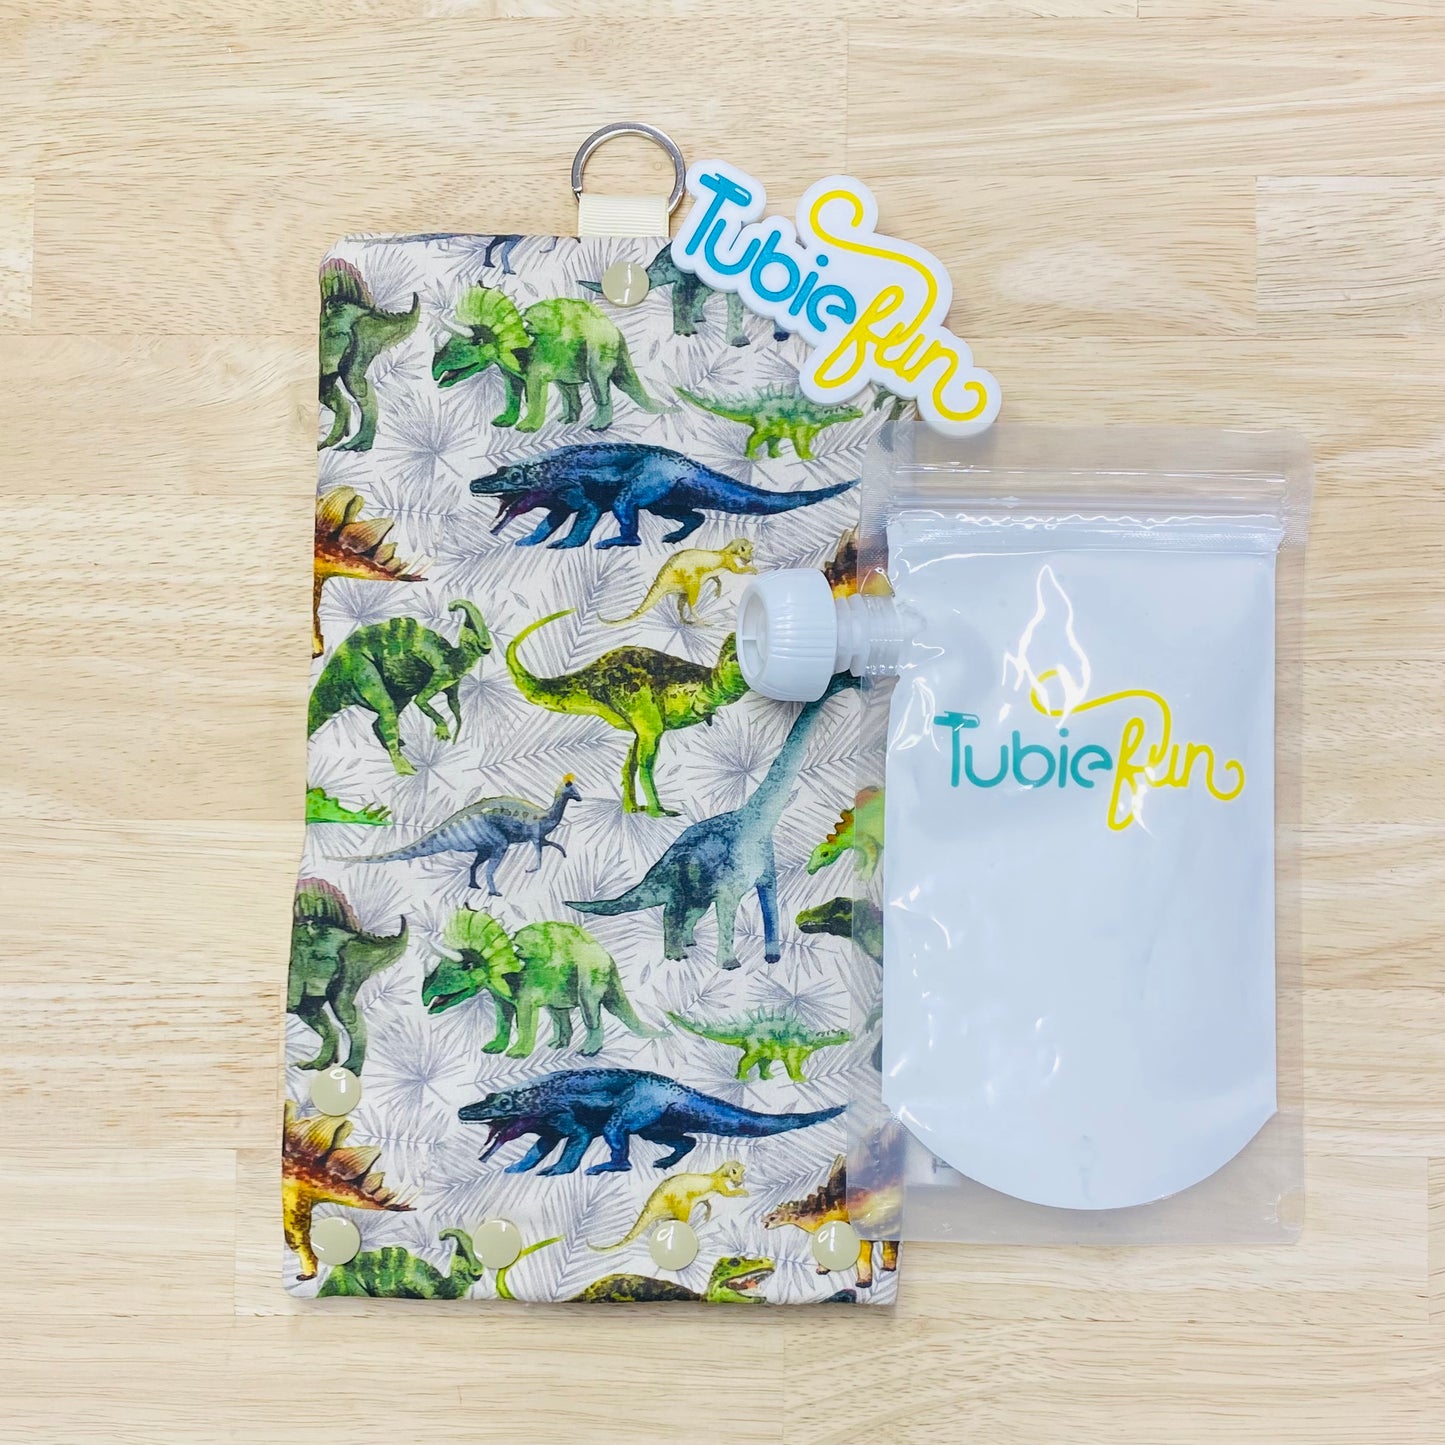 NEW Insulated Milk Bag Suitable for Tubie Fun 500ml Reusable Pouches - Dino's on Cream